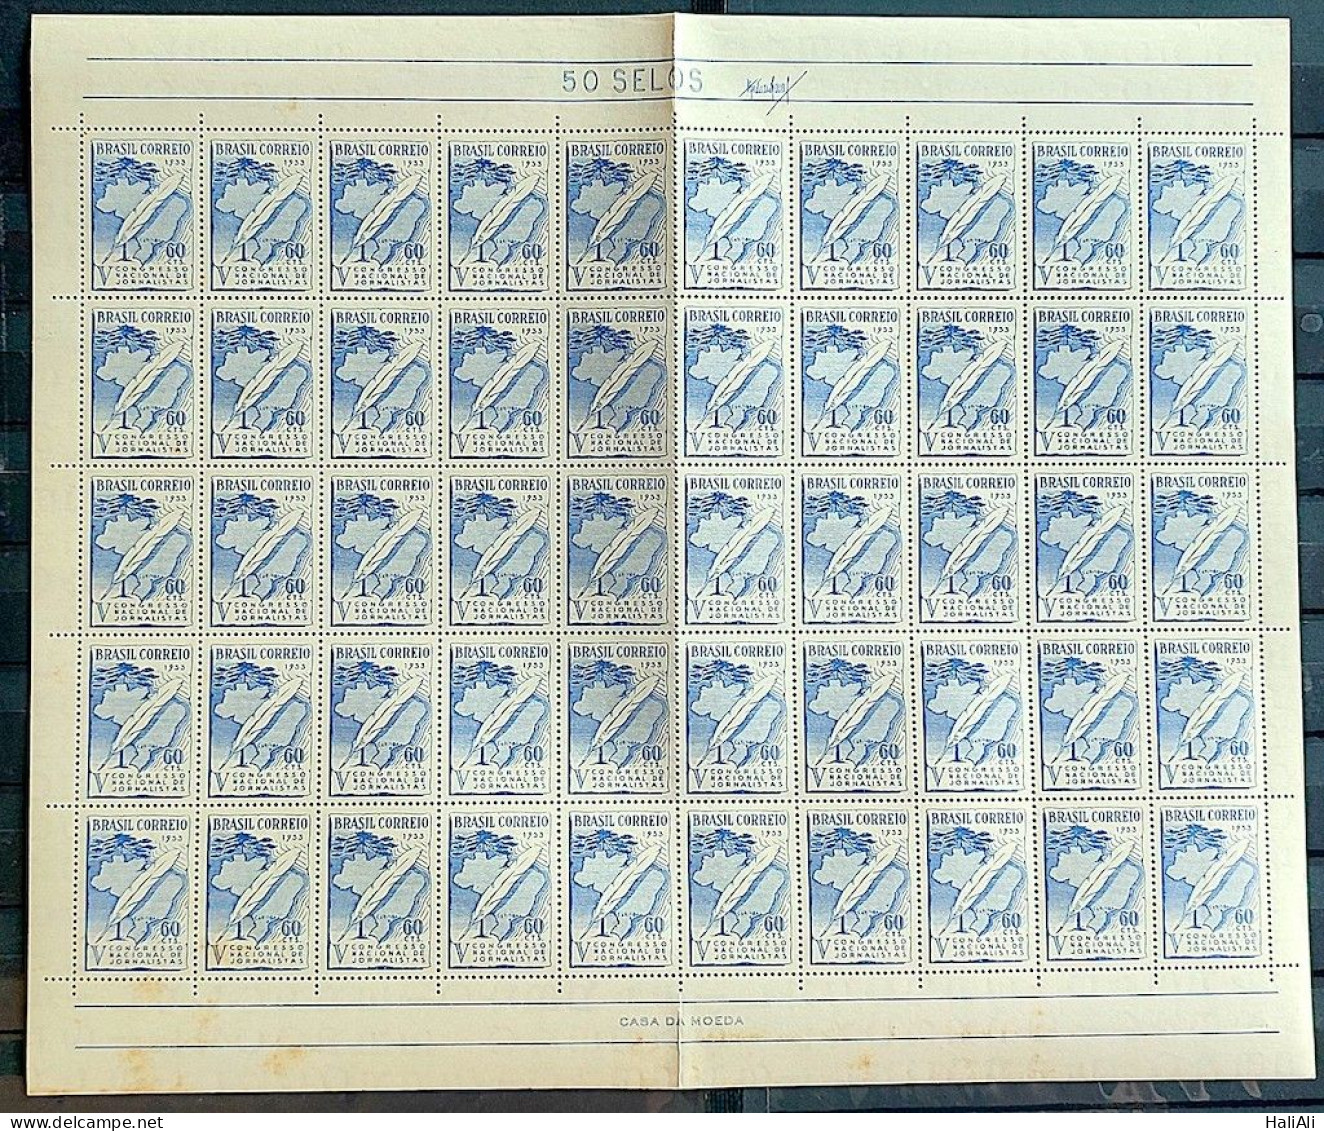 C 312 Brazil Stamp National Congress Of Journalists Map Curitiba 1953 Sheet - Unused Stamps